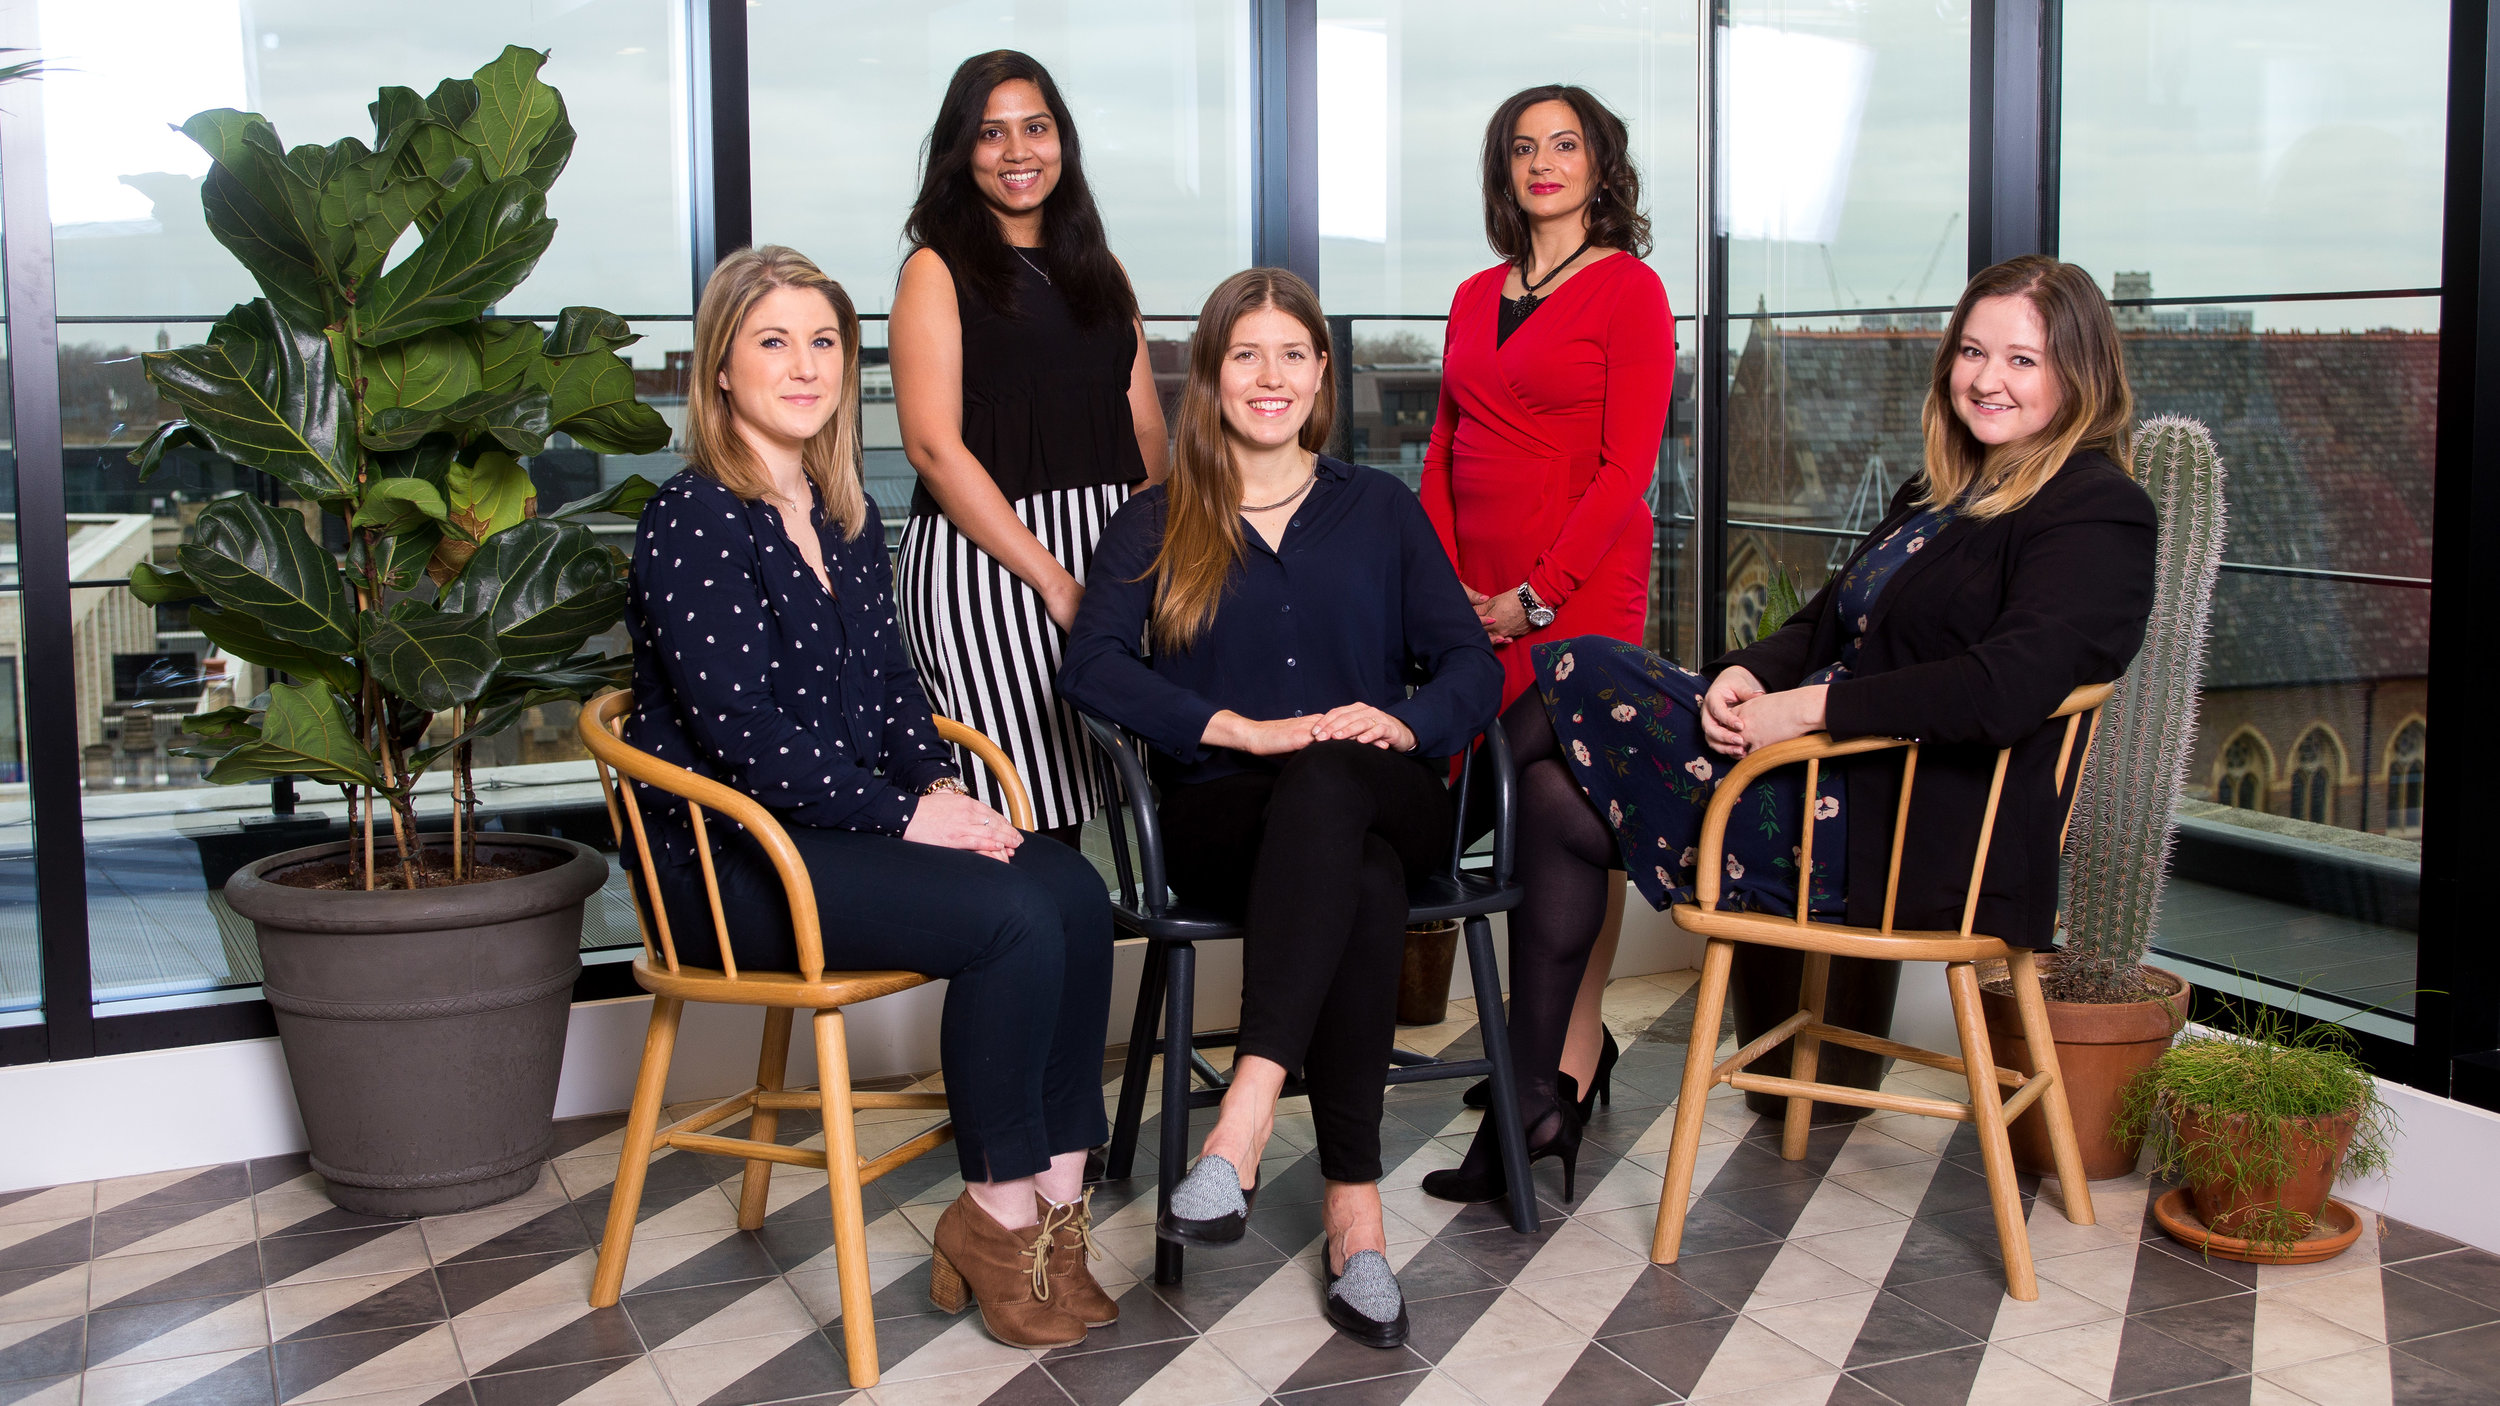  8 Barclays colleagues who were nominated in the TechWomen50 Awards 